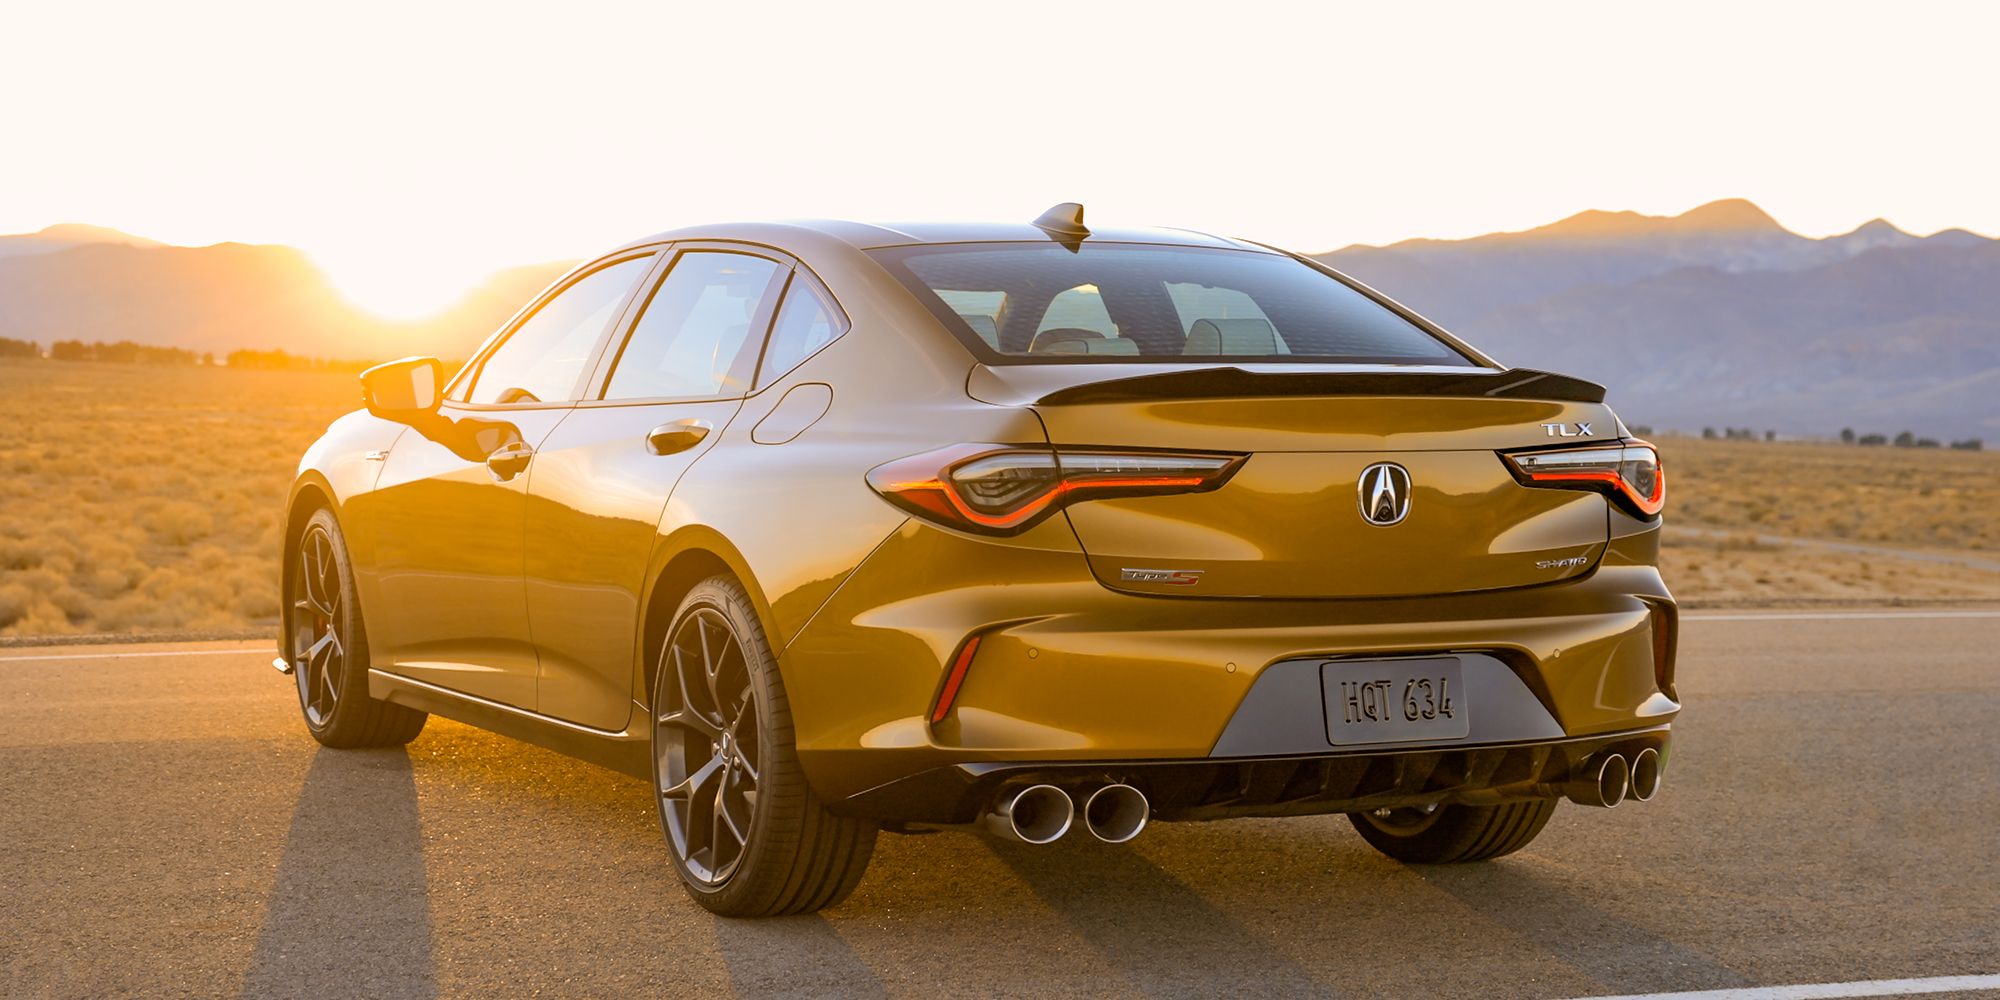 The rear of the TLX Type-S in yellow